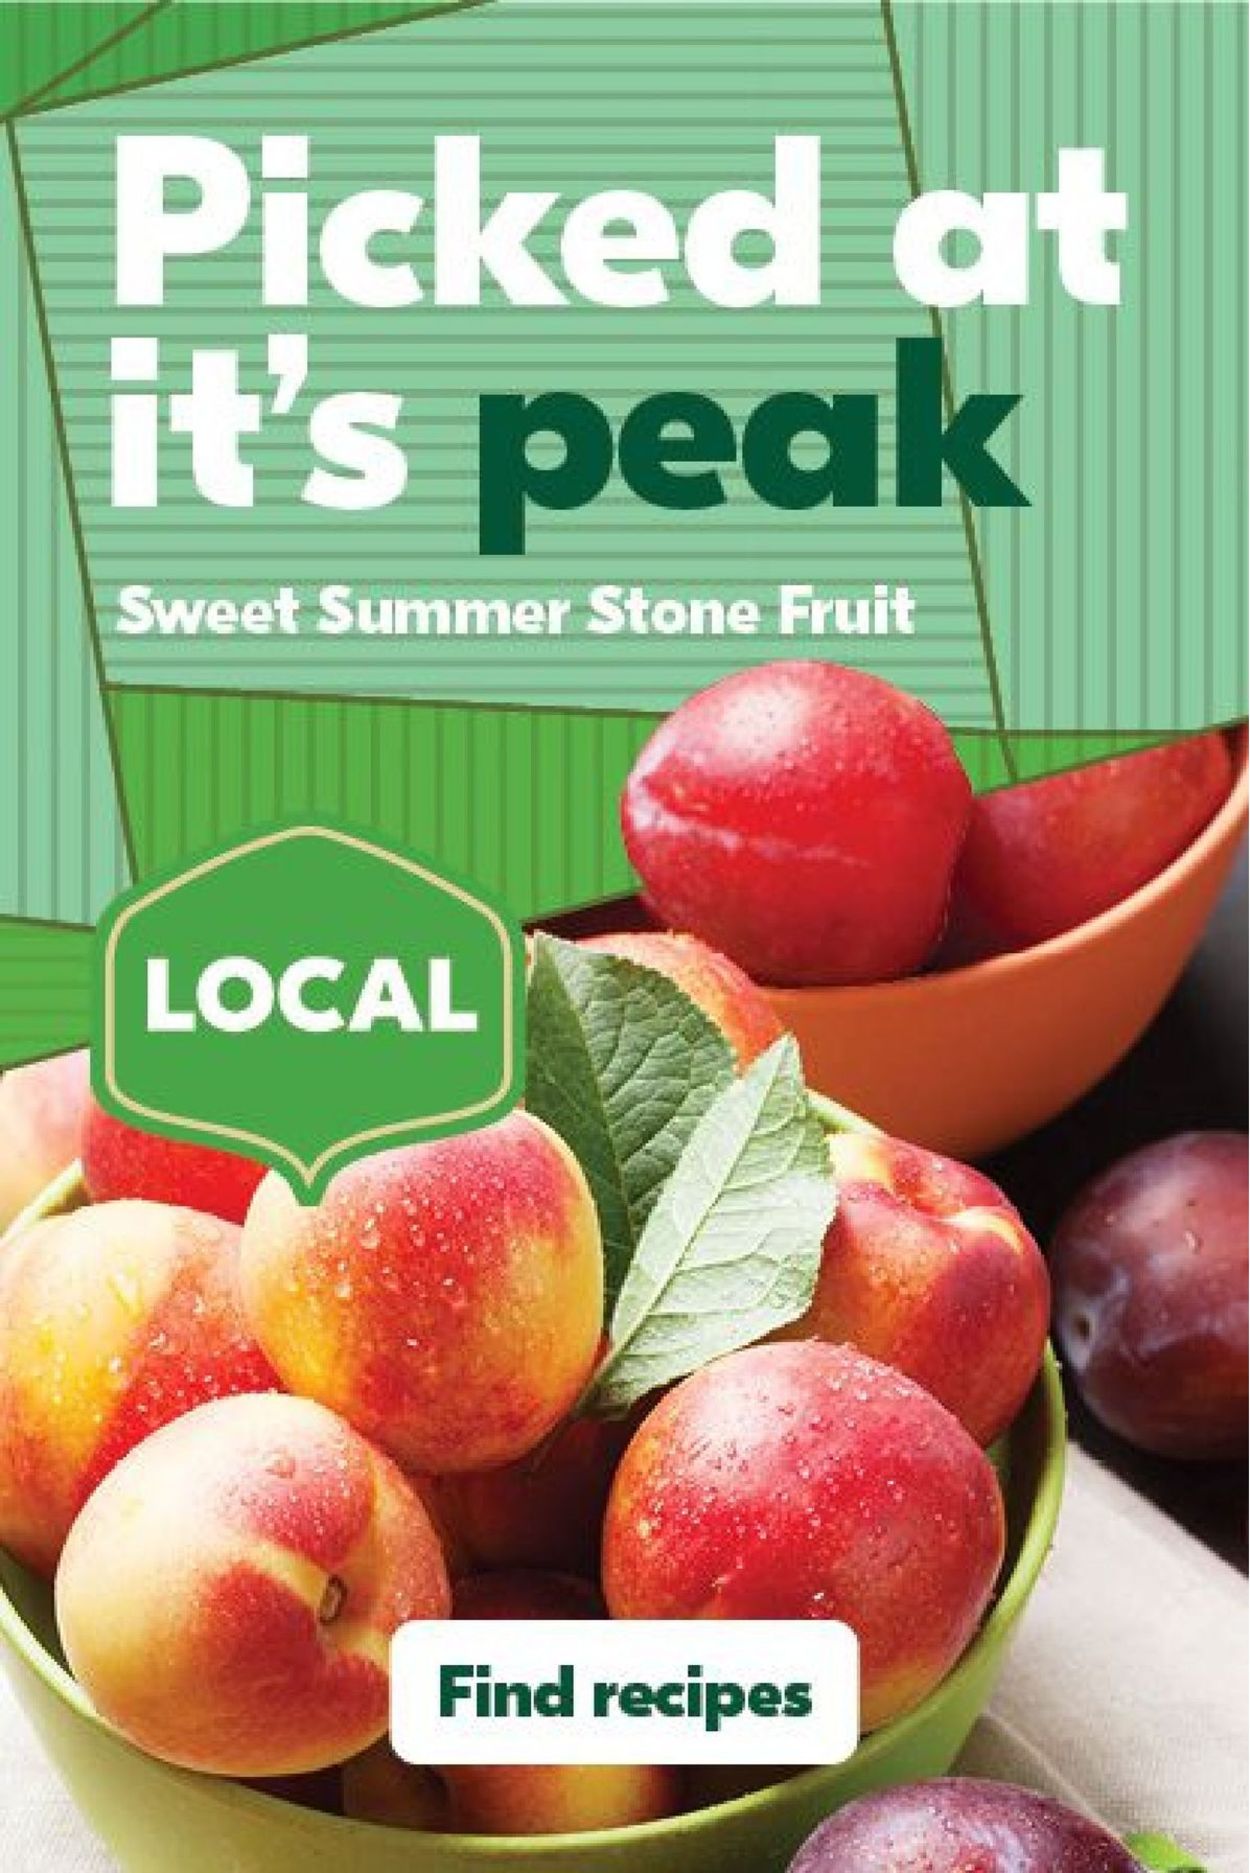 Sobeys Flyer from 08/20/2020